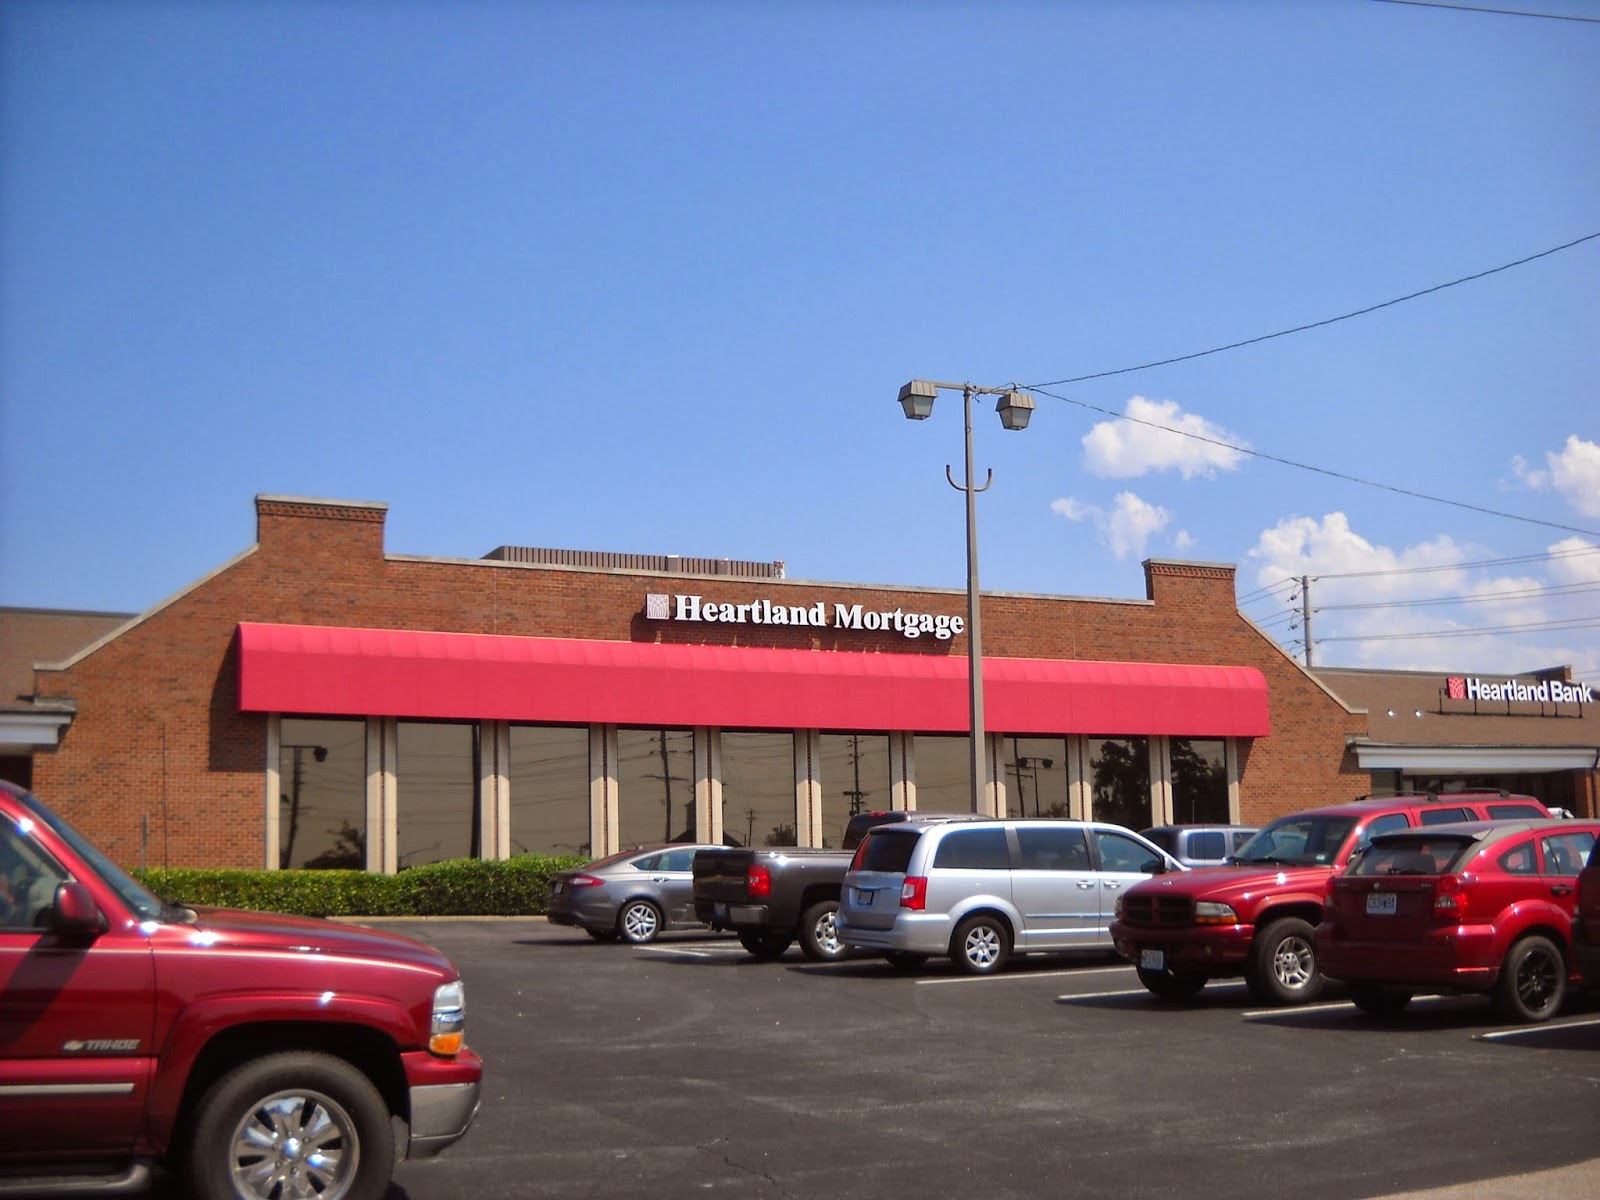 Old Grocery Stores: Former Schnucks - Clayton and Woods Mill - Town & Country, MO